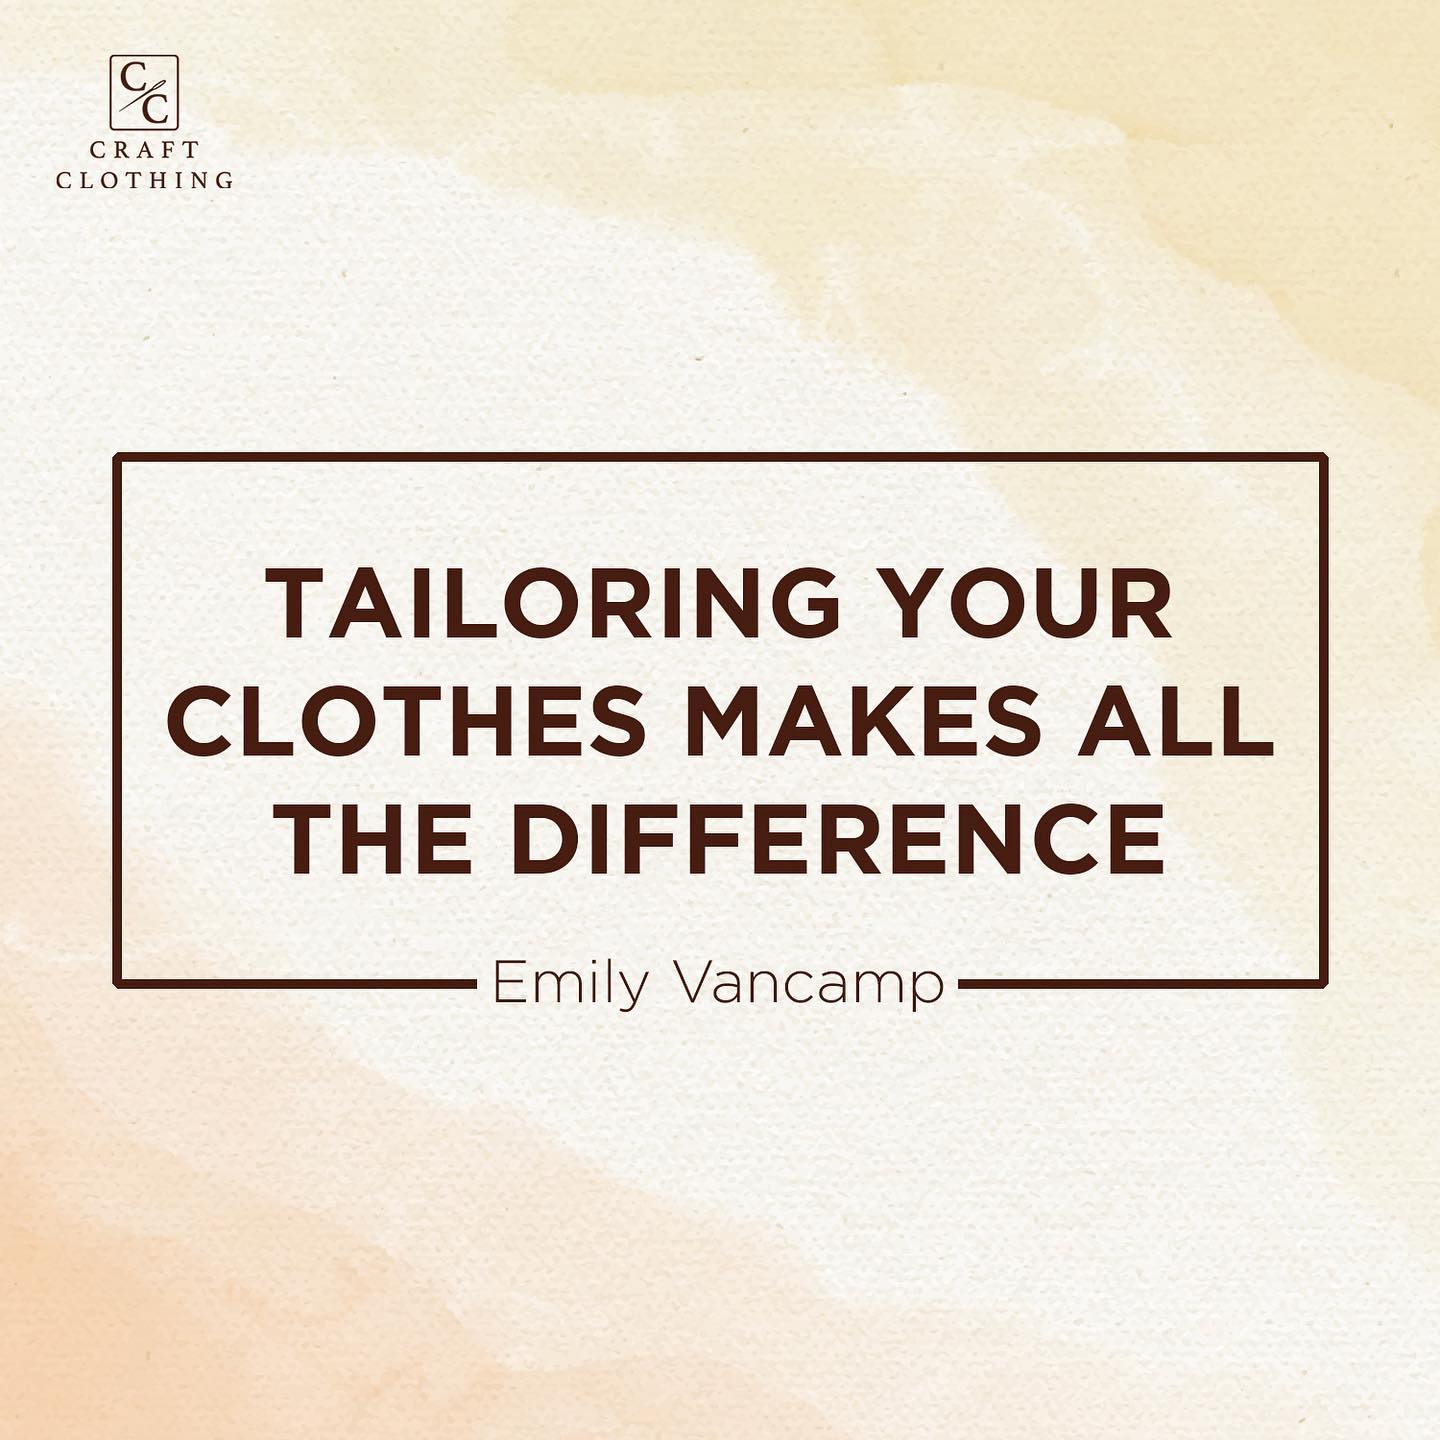 Tailoring your clothes makes all the DIFFERENCE